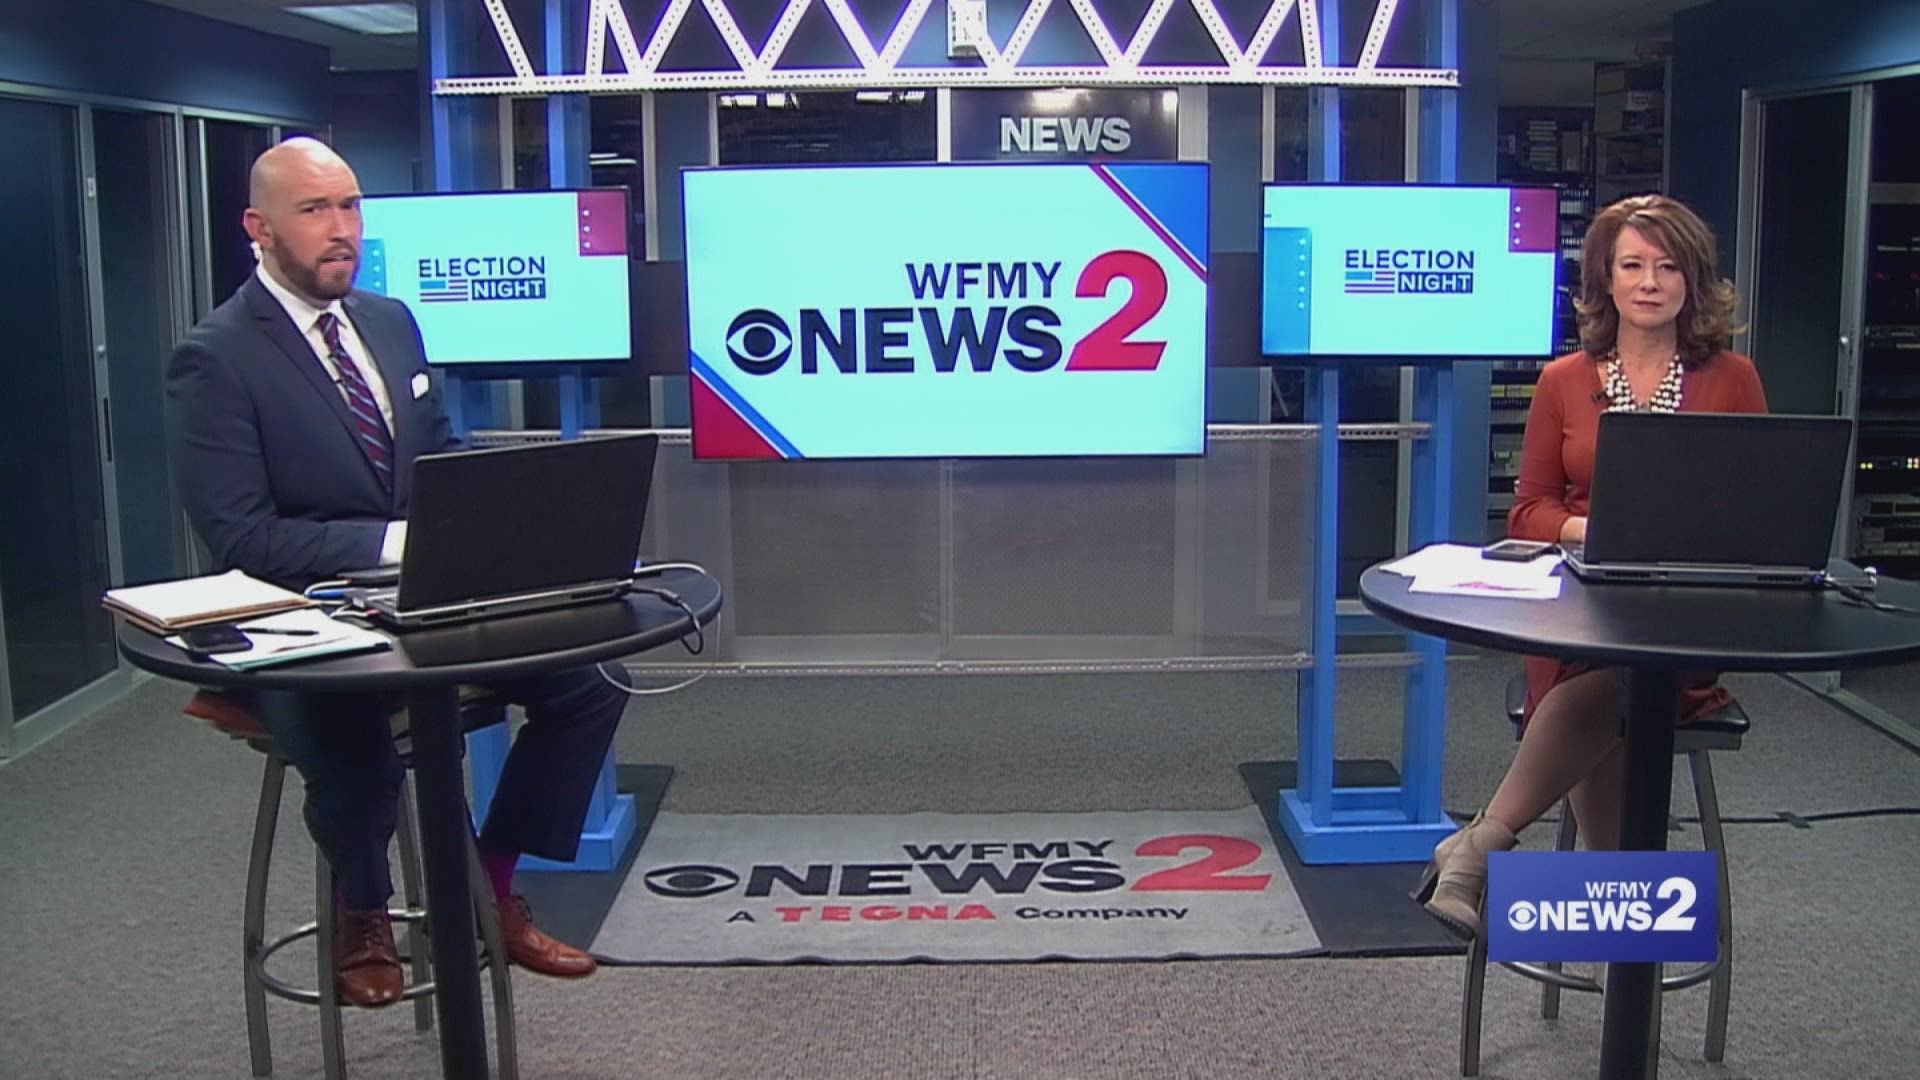 WFMY's Jess Winters takes a closer look at the race for senate with Thom Tillis and Cal Cunningham.